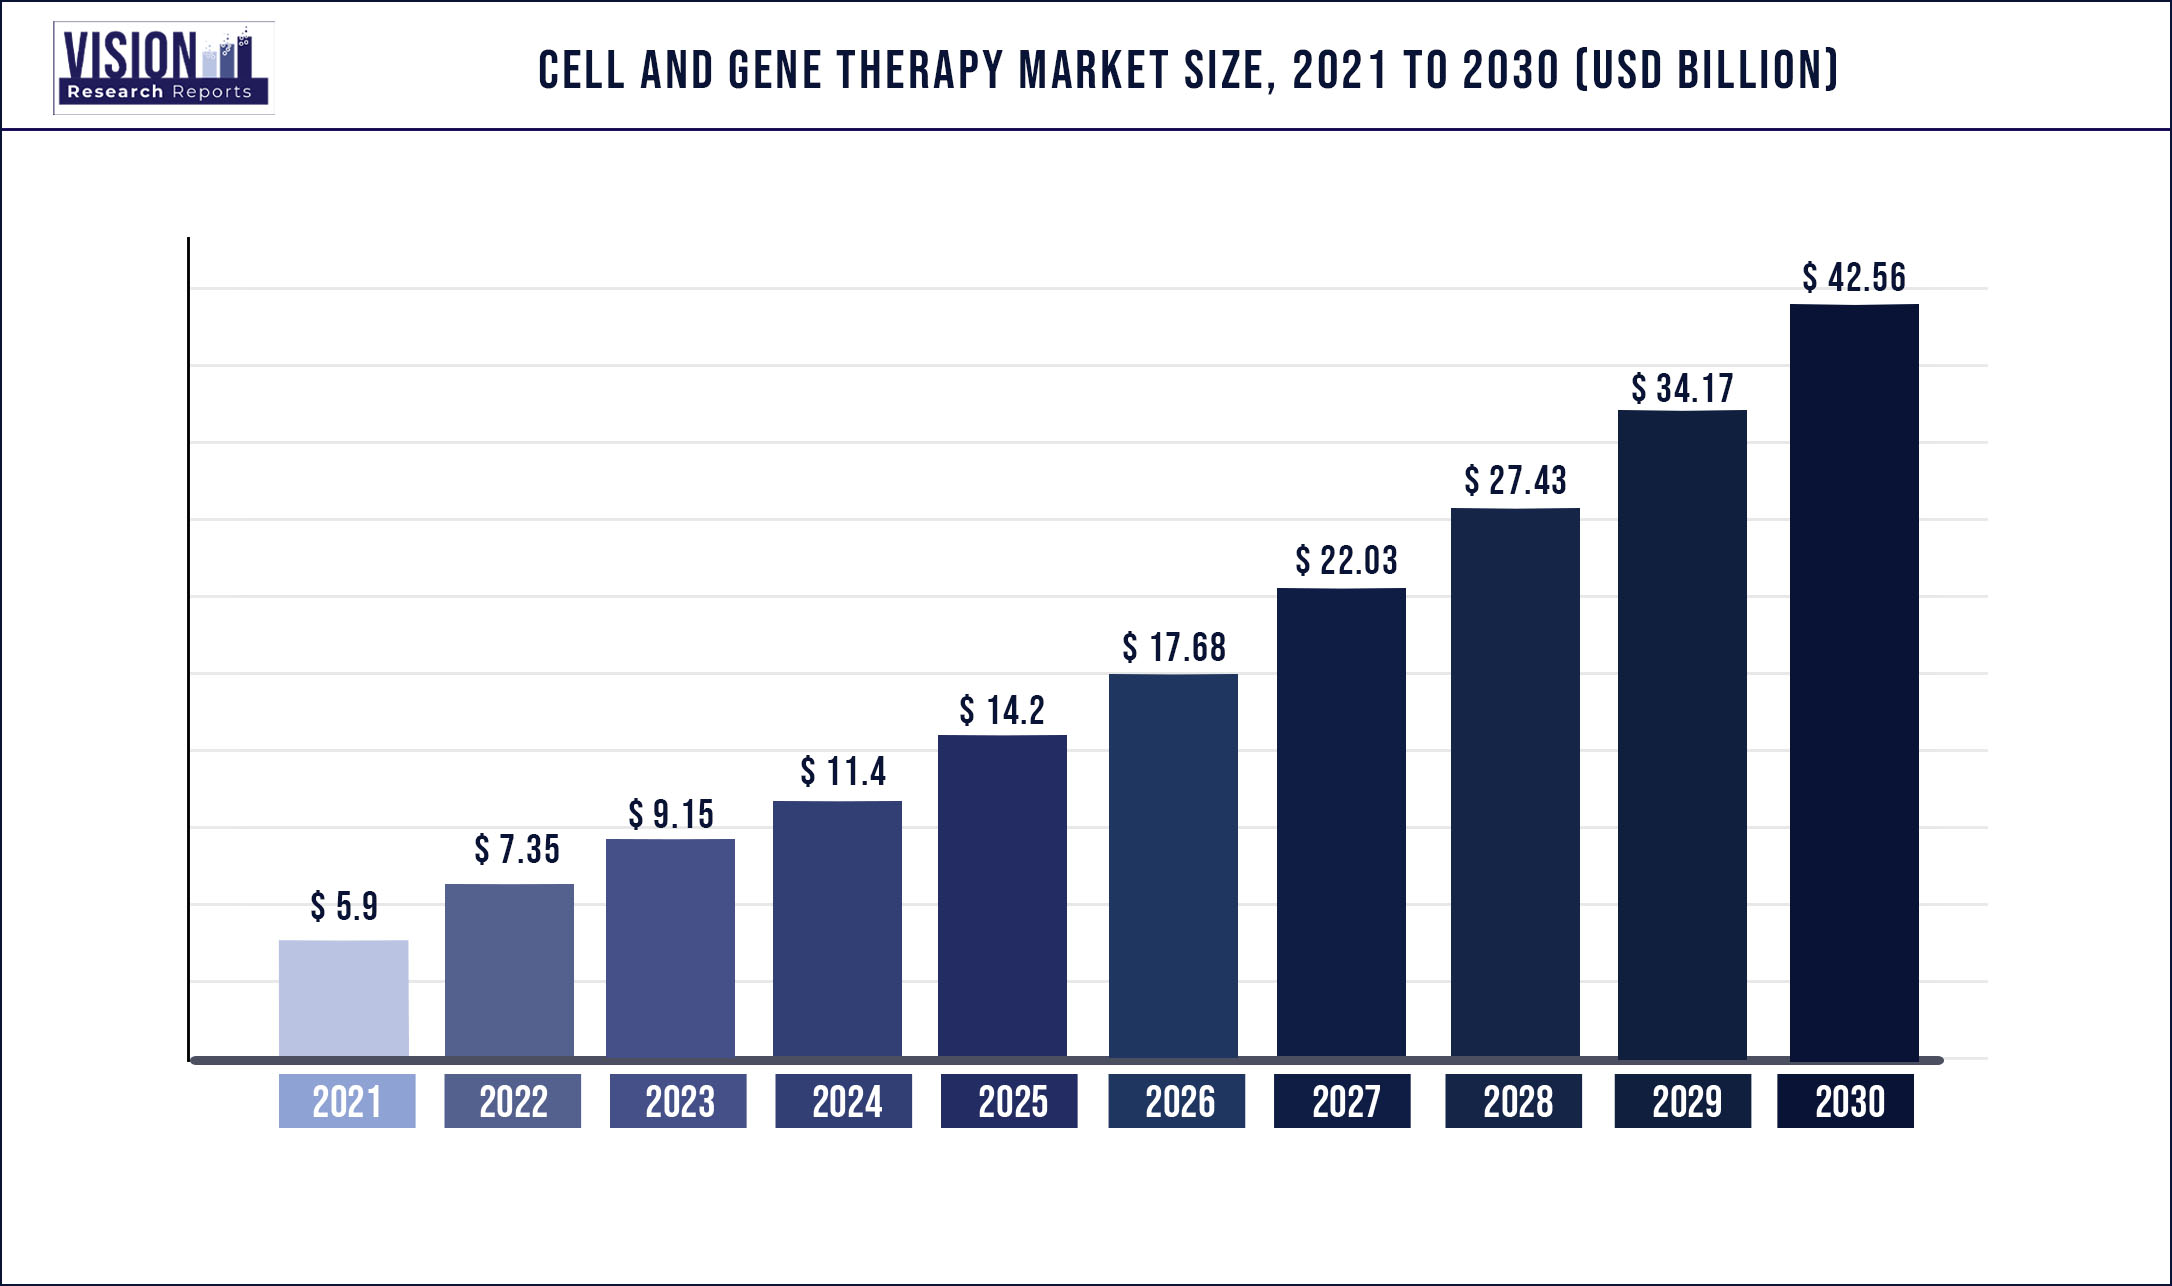 Cell and Gene Therapy Market Size 2021 to 2030